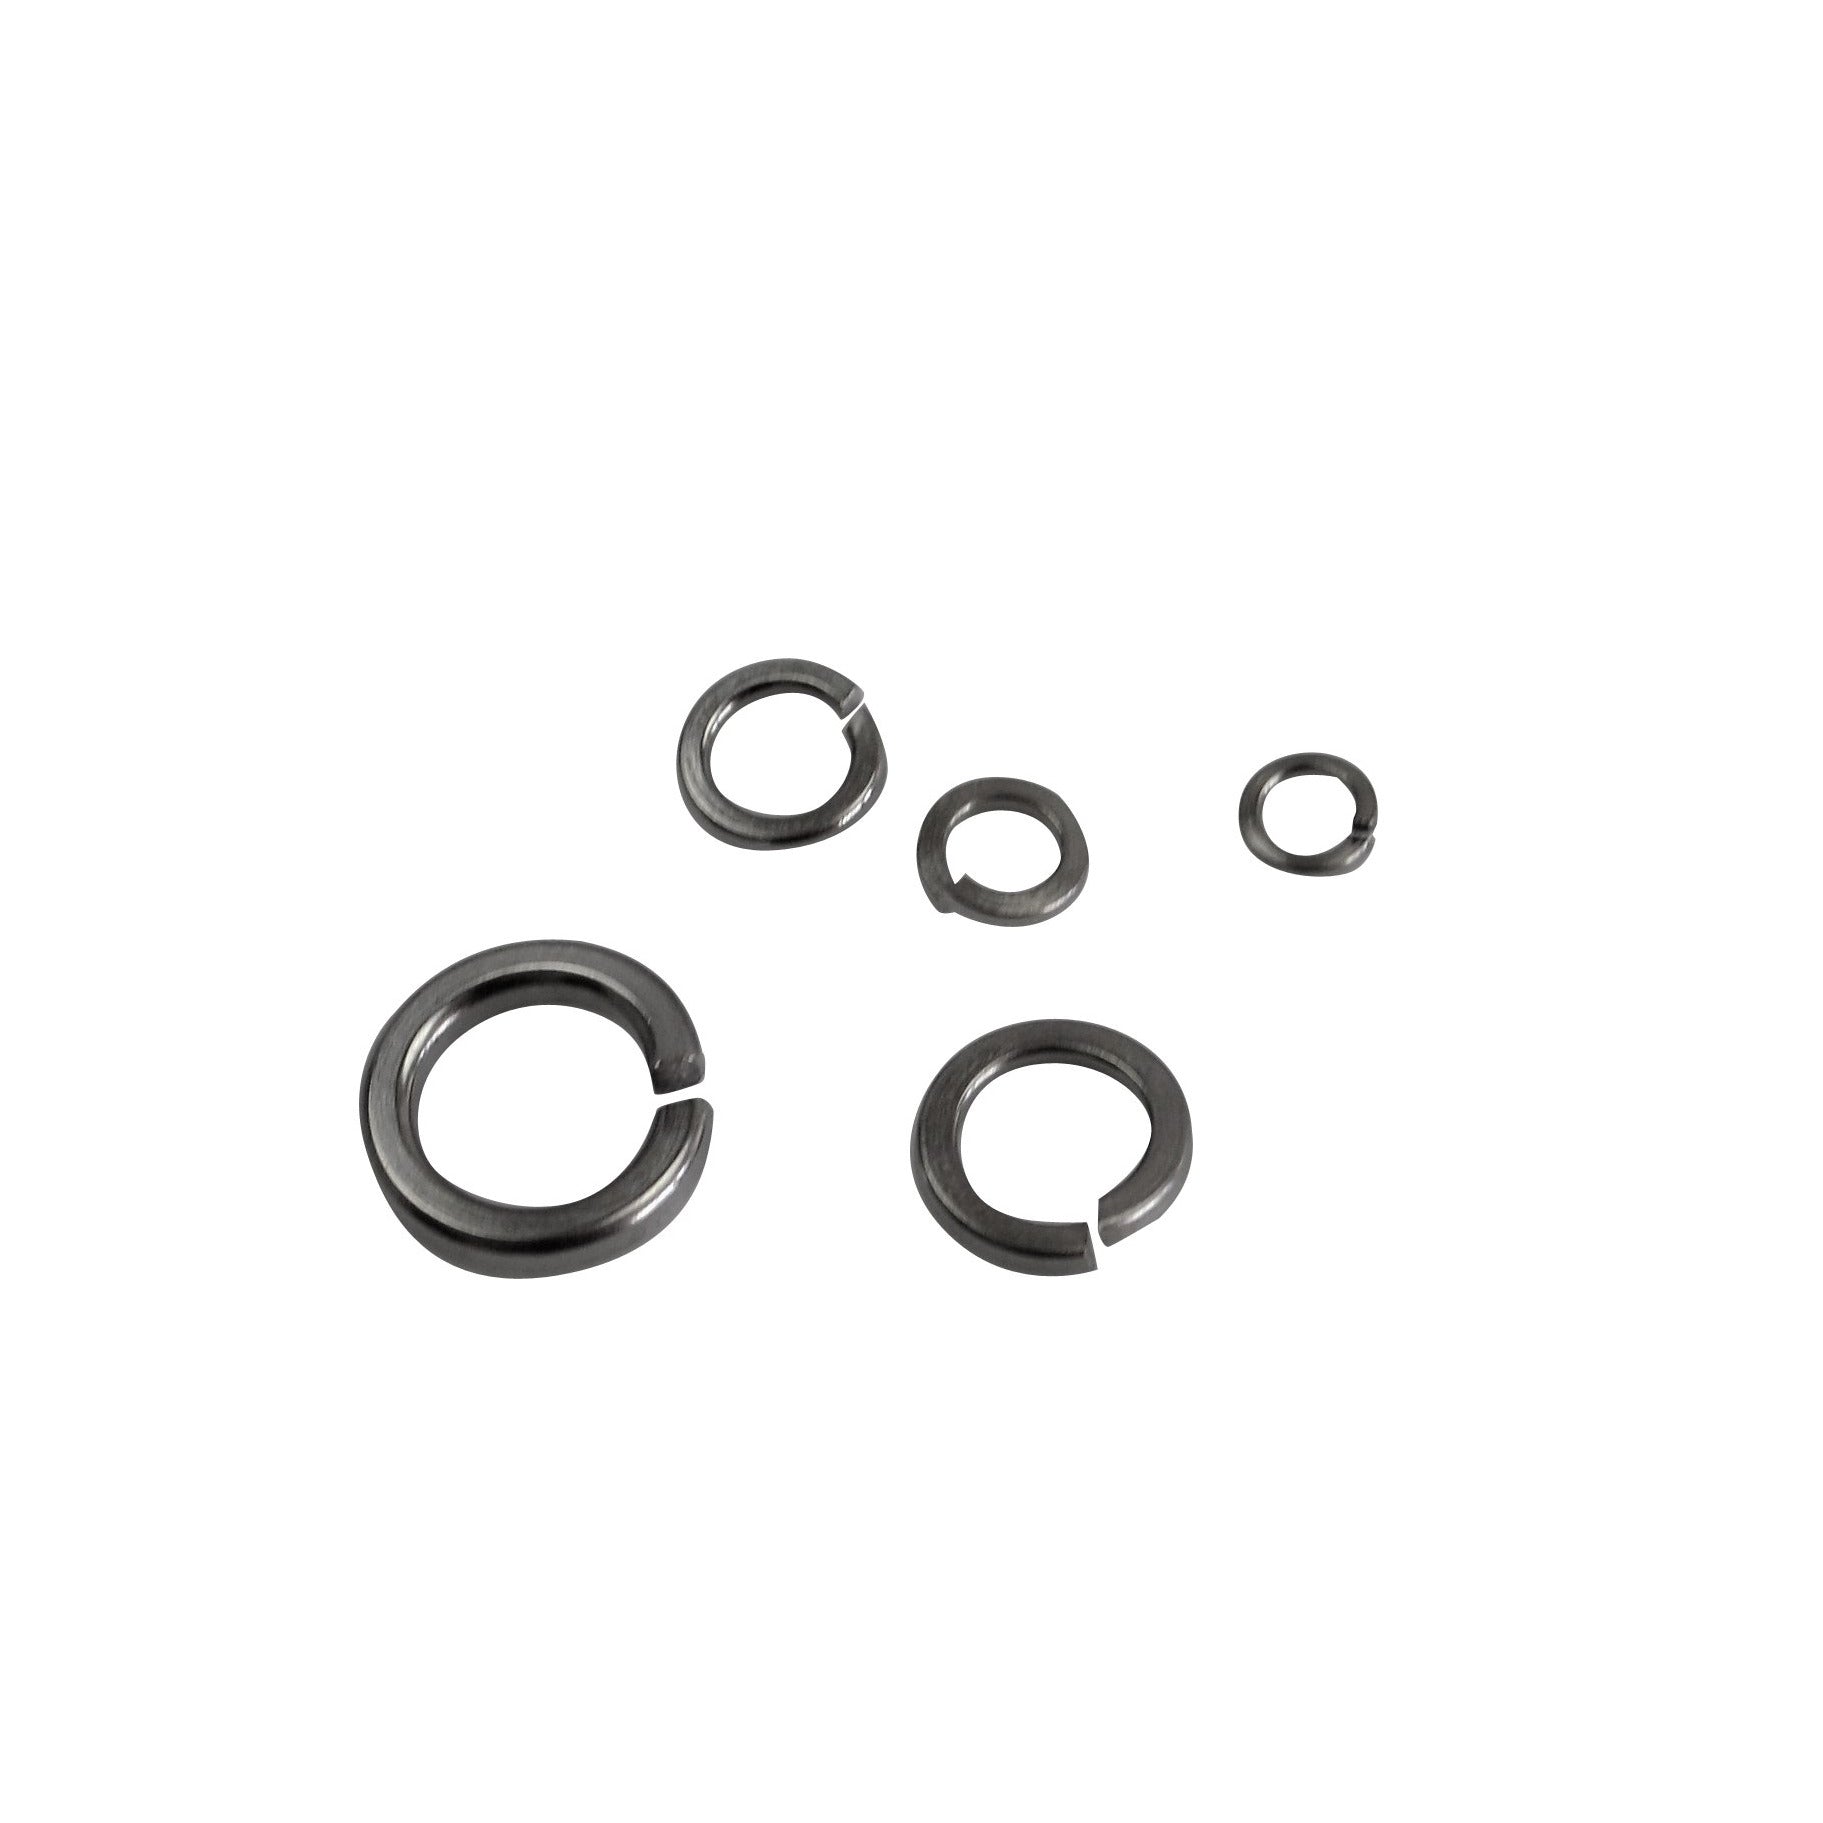 flat washer split washer teeth washer stainless steal 460pc kit 5 sizes M4 M10 fastners assortment set